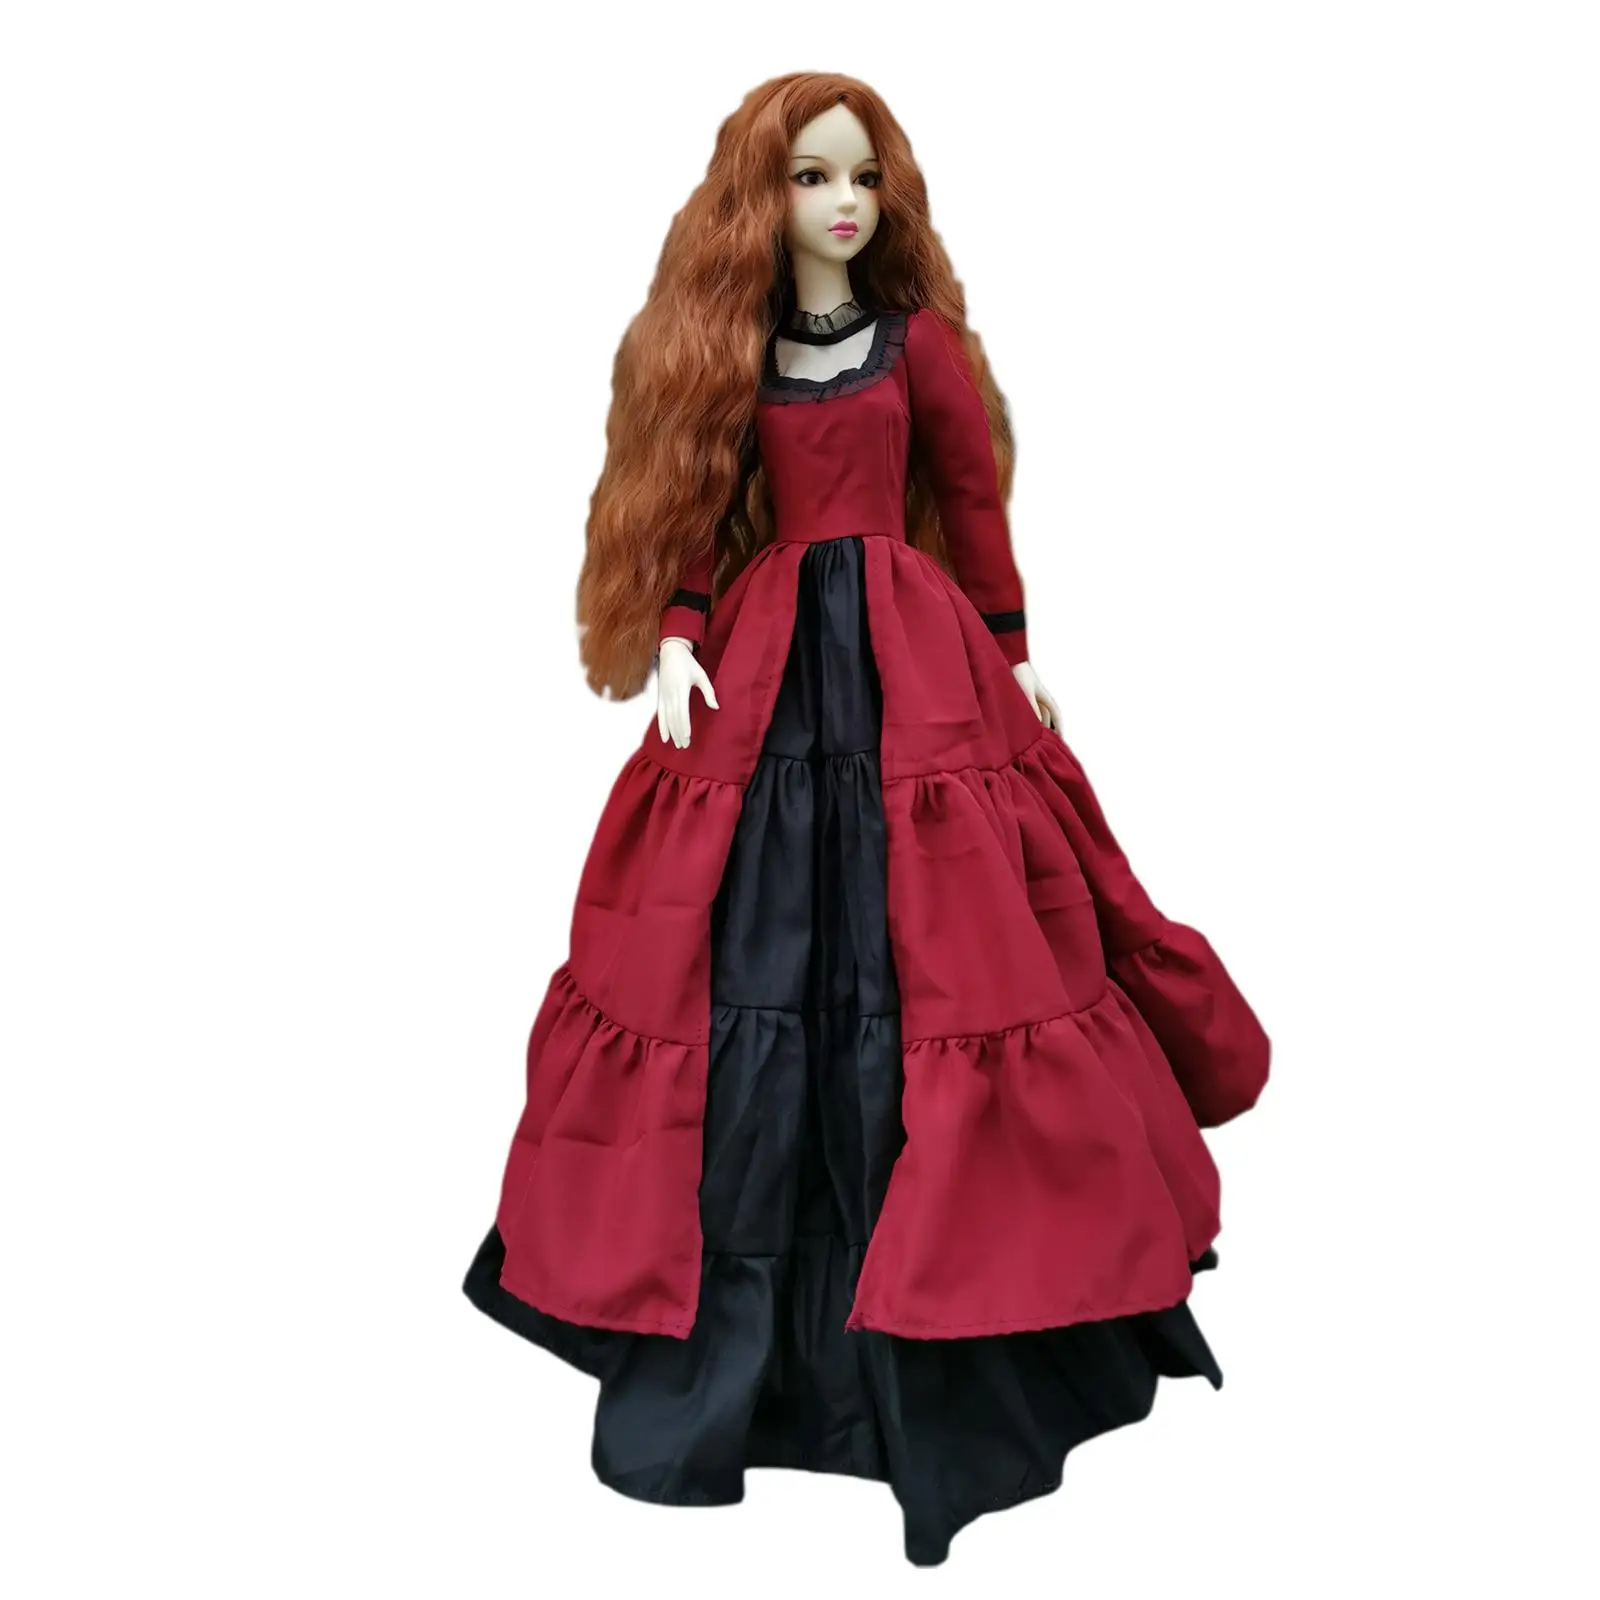 Ball Jointed Doll 1/3 Dolls Princess Doll with Beautiful Outfit and Doll Accessories 24 inch Doll for Thanksgiving Women Kids